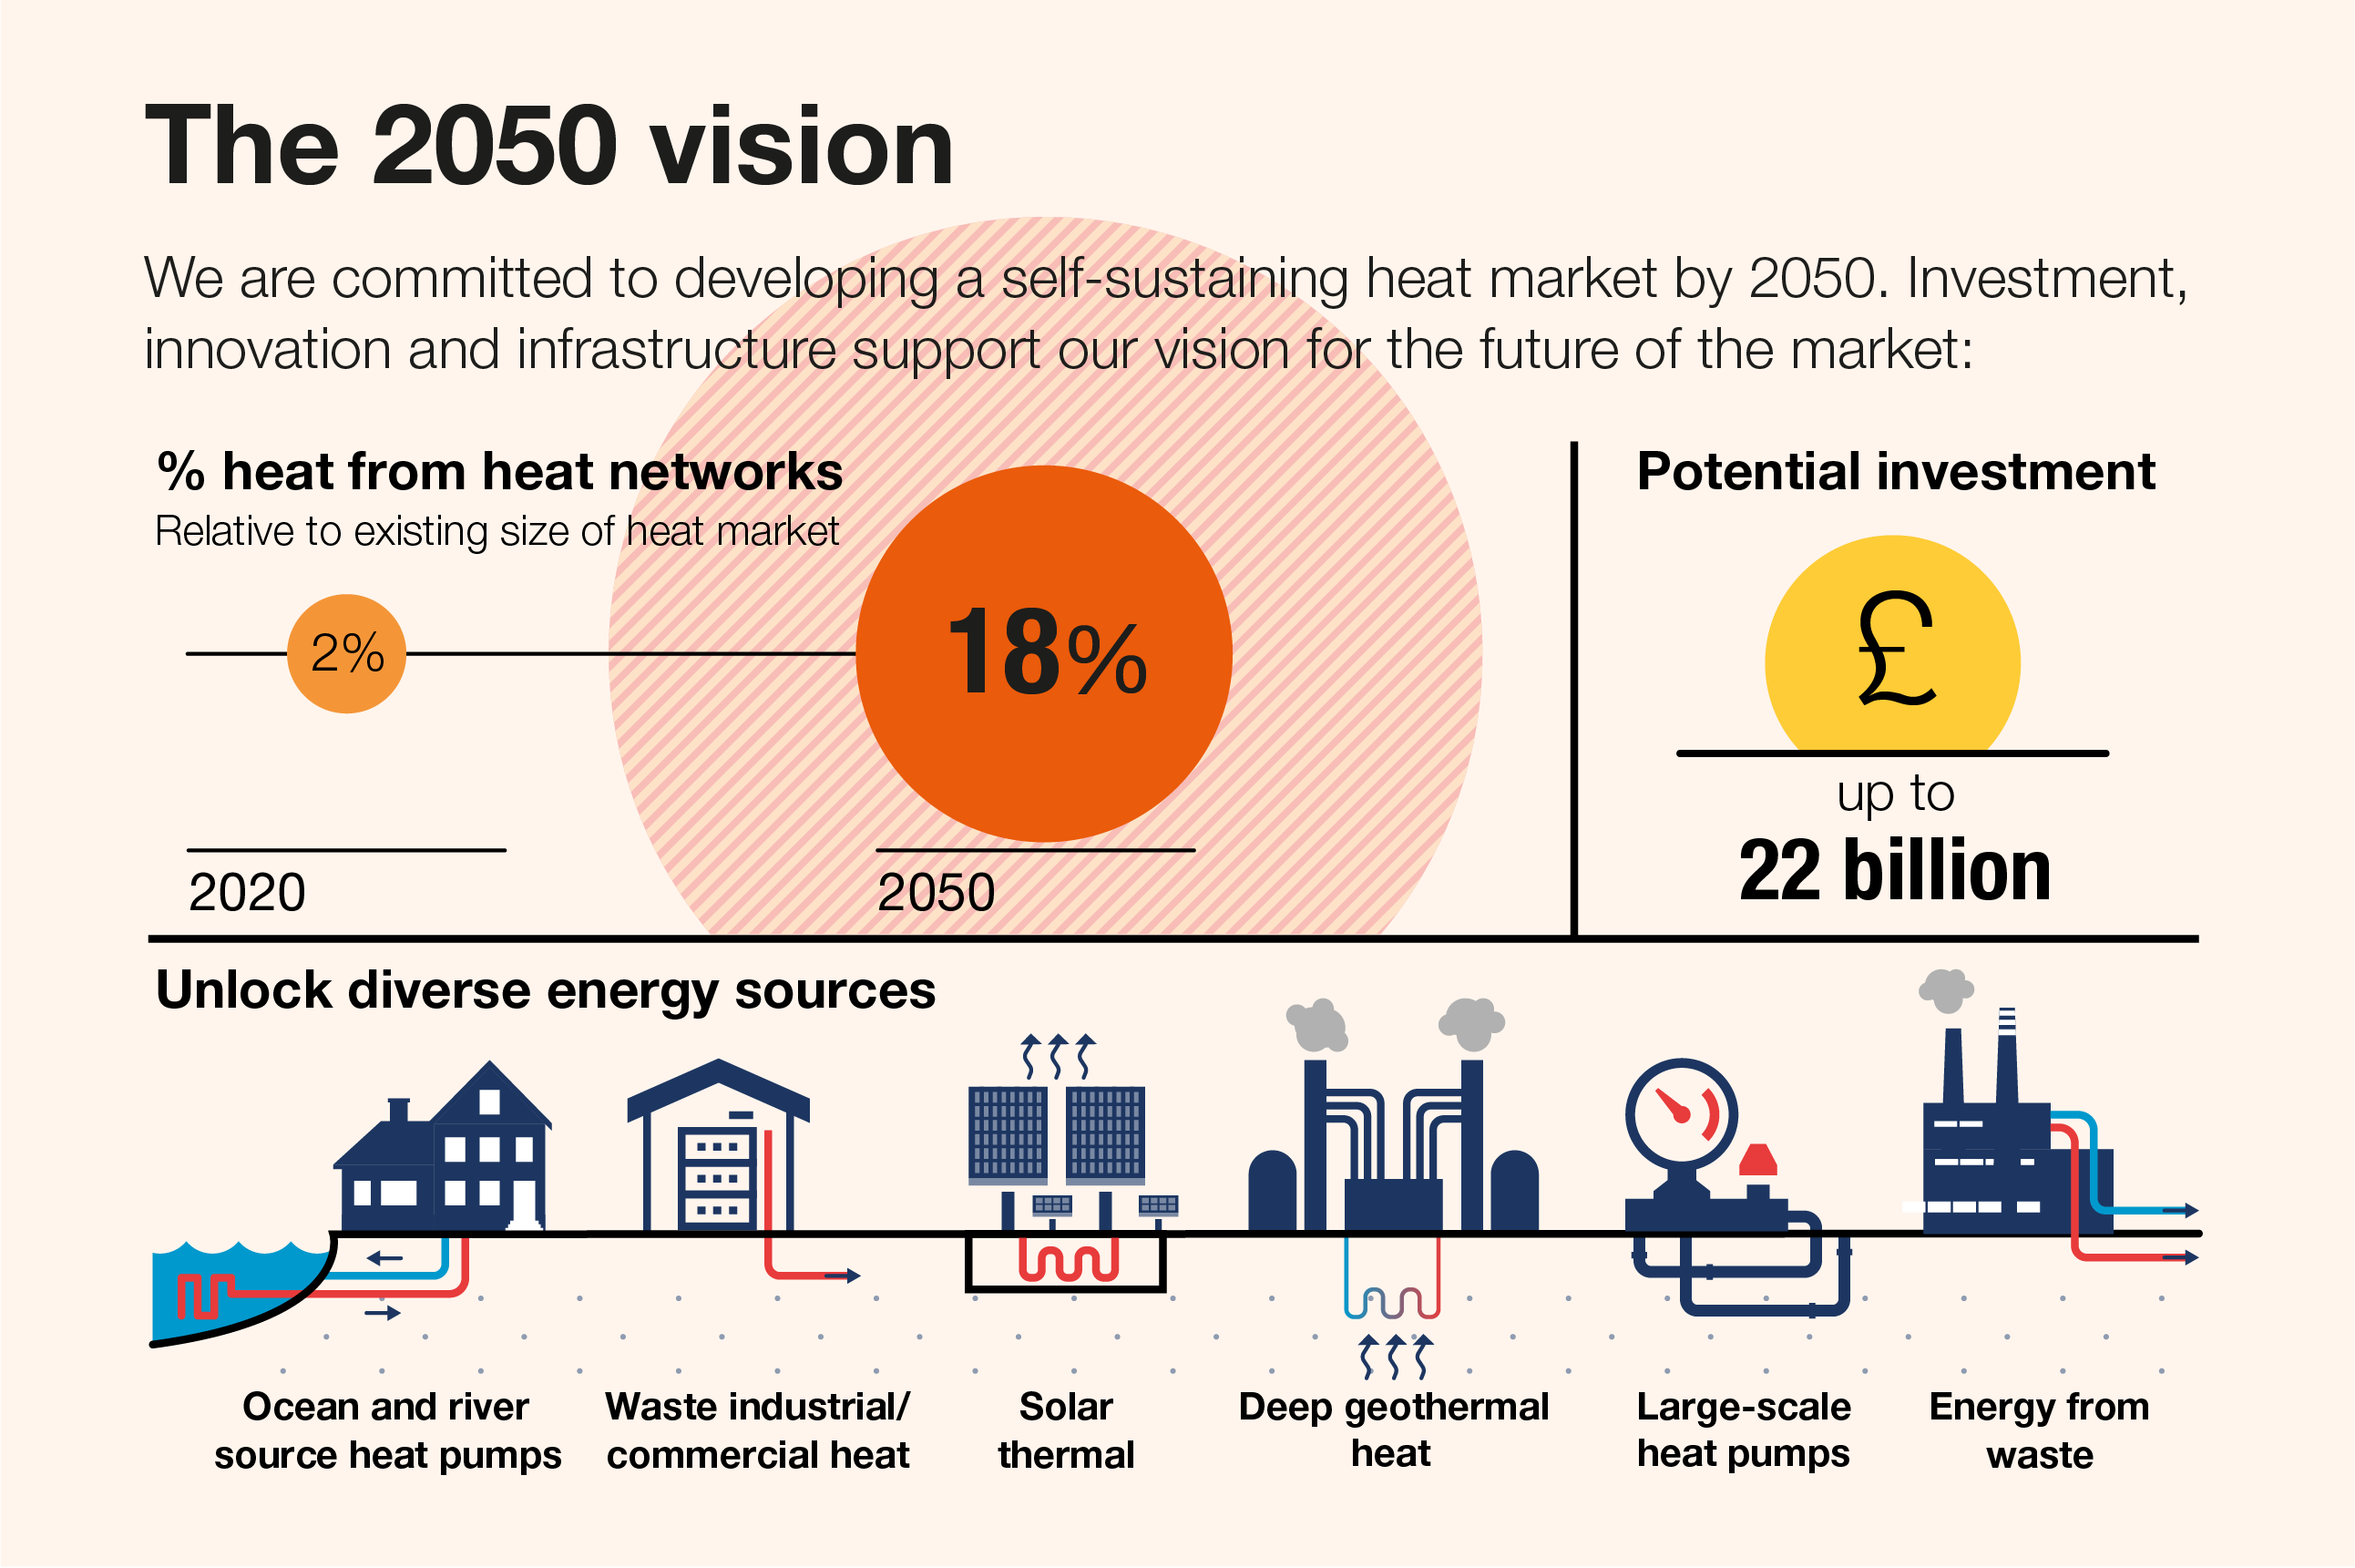 An infographic with text, statistics and illustrations to show the Department for Business, Energy and Industrial Strategy’s 2050 vision. We are committed to developing a self-sustaining heat market by 2050. Investment, innovation and infrastructure support our vision for the future of the market. In 2020, heat networks formed 2% of the heat market. By 2050, heat networks could form 18% of the heat market. There is potential investment of up to £22 billion. We will unlock diverse energy sources, including ocean and river source heat pumps, waste industrial heat, waste commercial heat, solar thermal, deep geothermal heat, large-scale heat pumps and energy from waste.